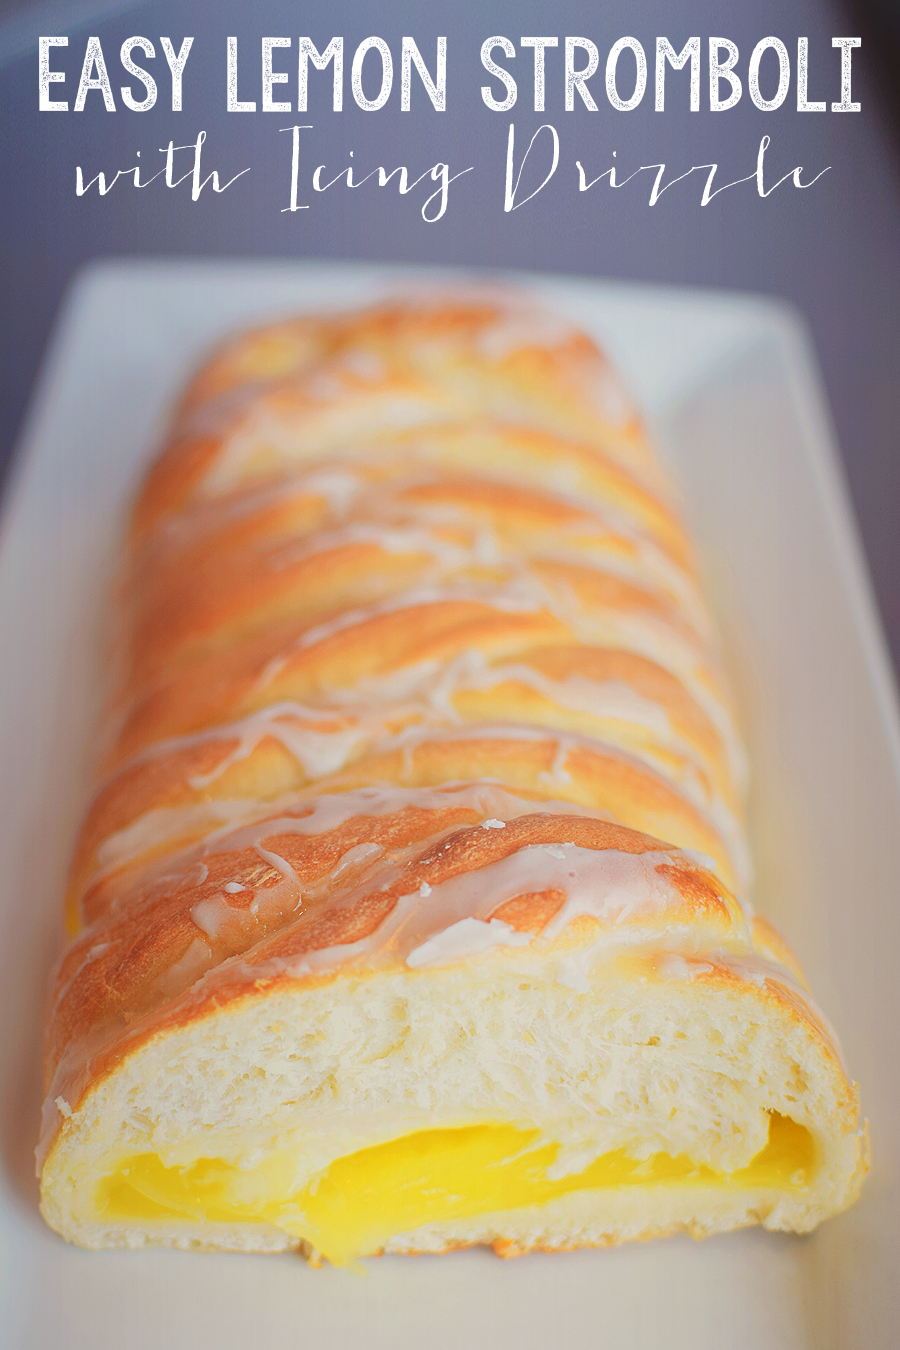 Easy Lemon Stromboli with Icing Drizzle